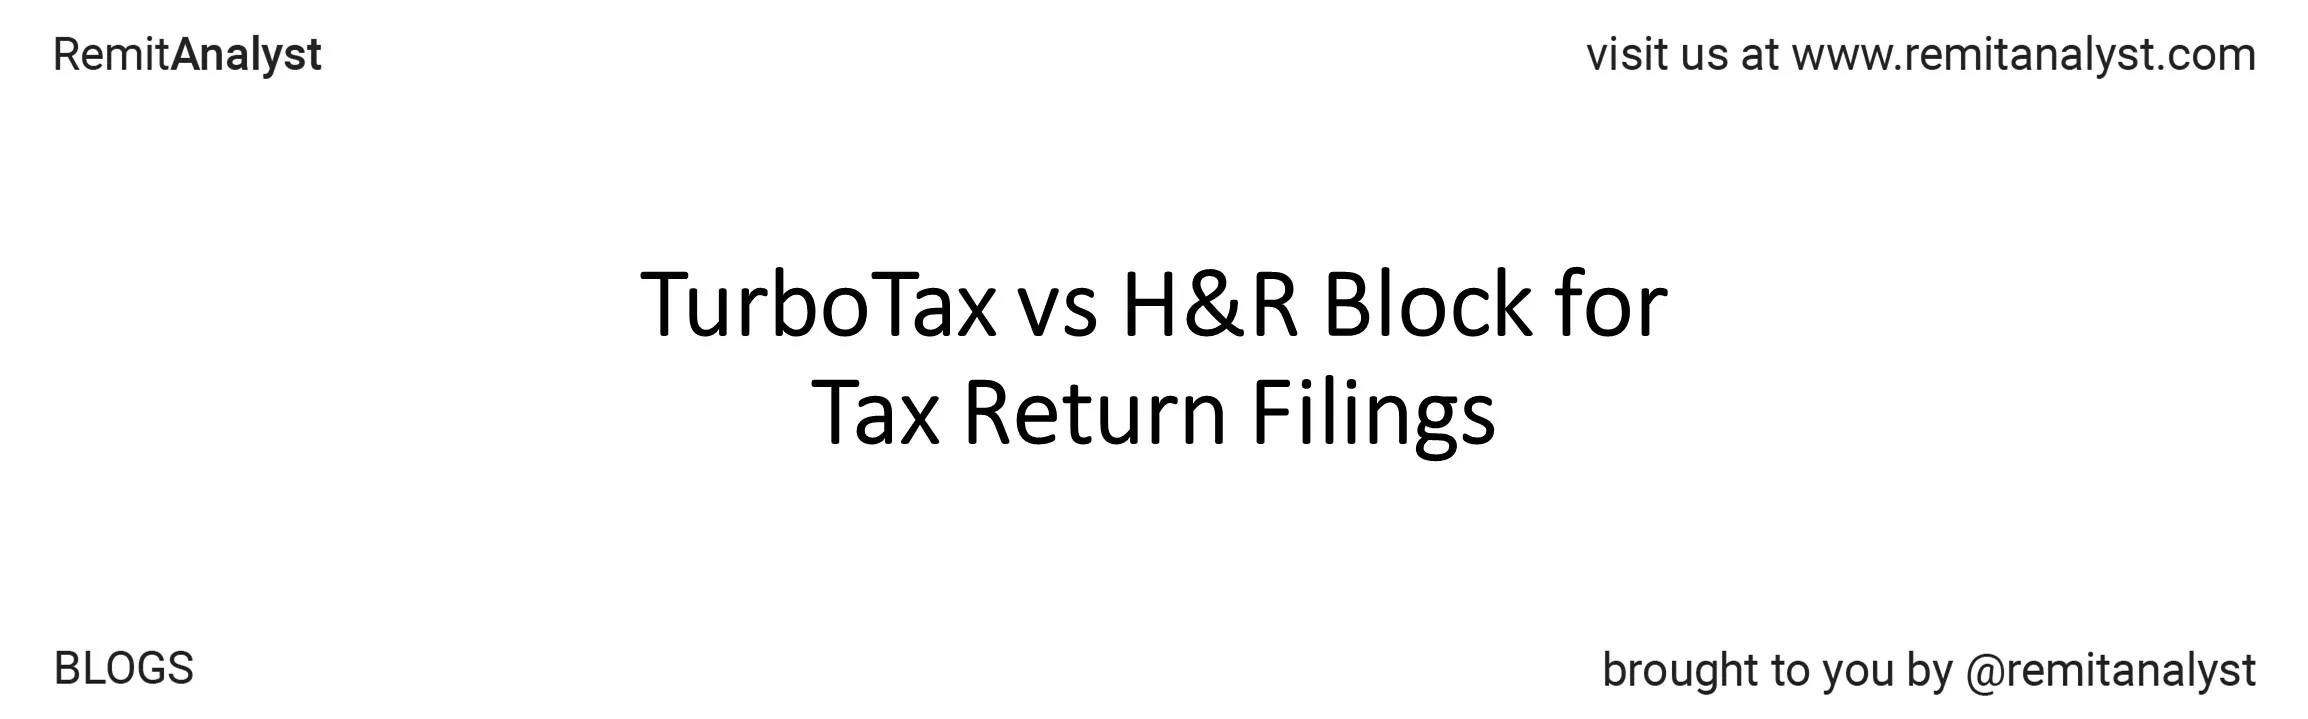 difference-between-turbotax-hrblock-title